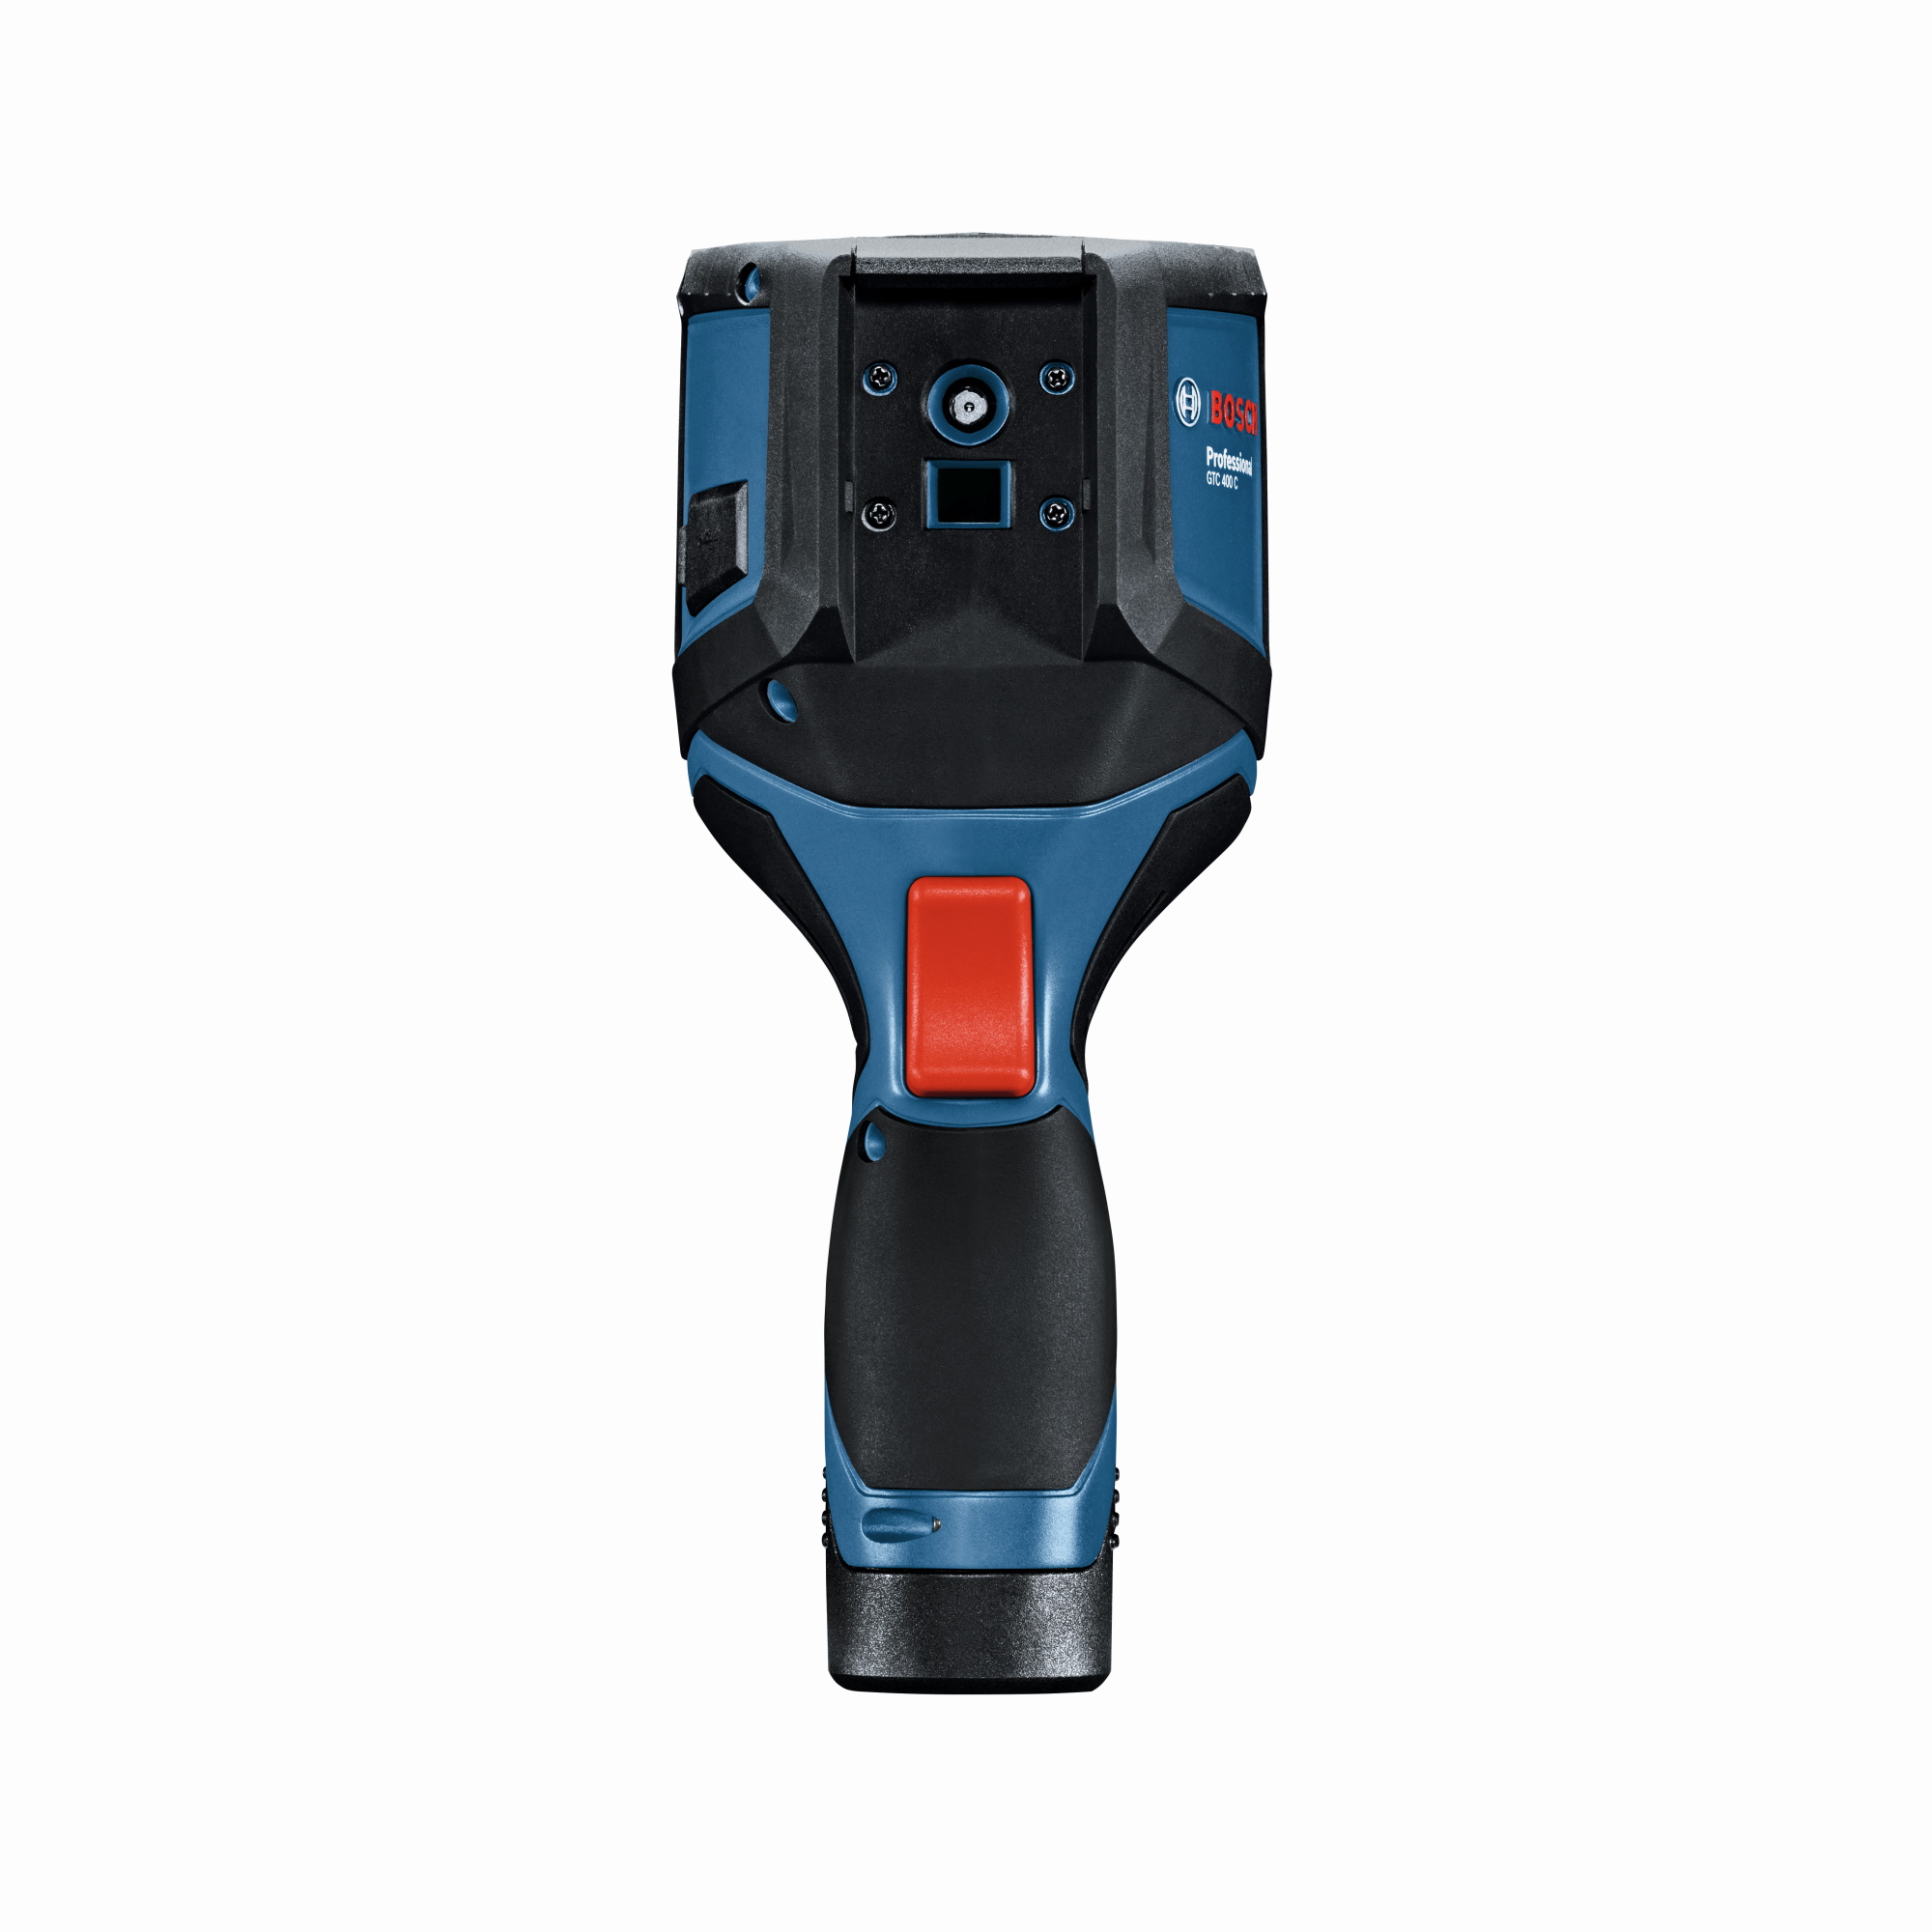 Bosch 12V Max Connected Thermal Camera - GTC400C